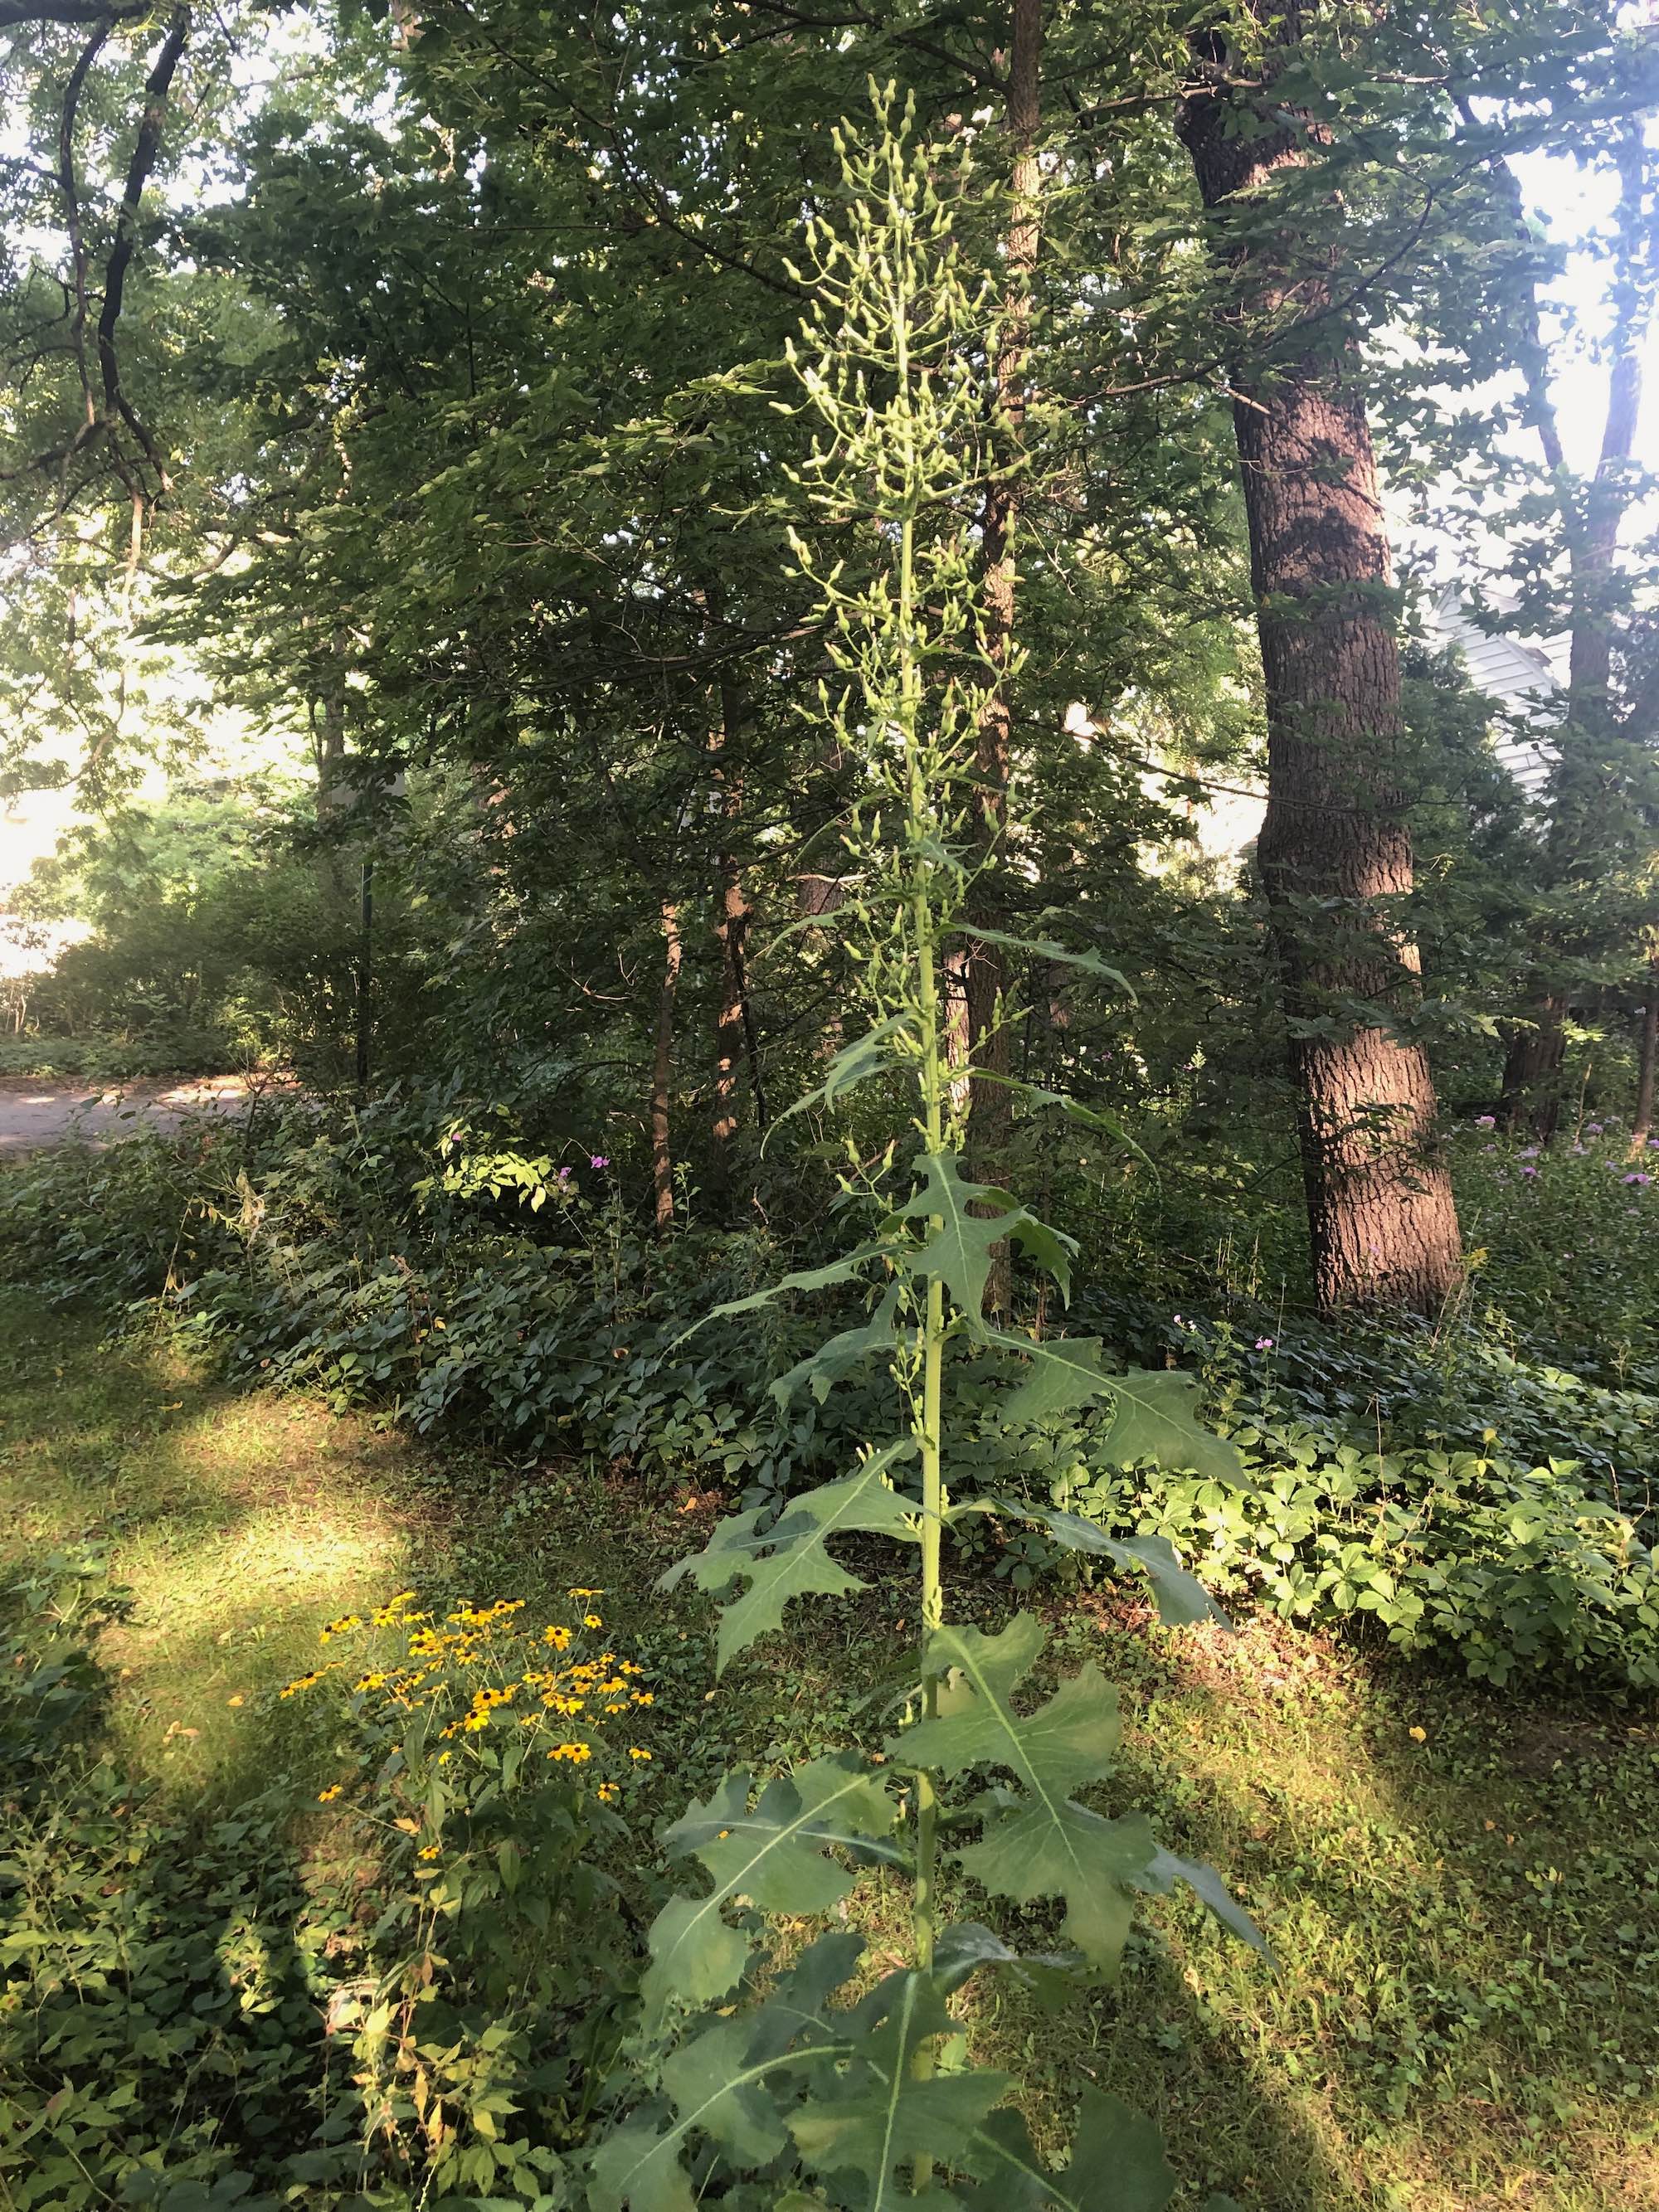 Tall Blue Lettuce near Duck Pond in Madison, Wisconsin on August 15, 2021